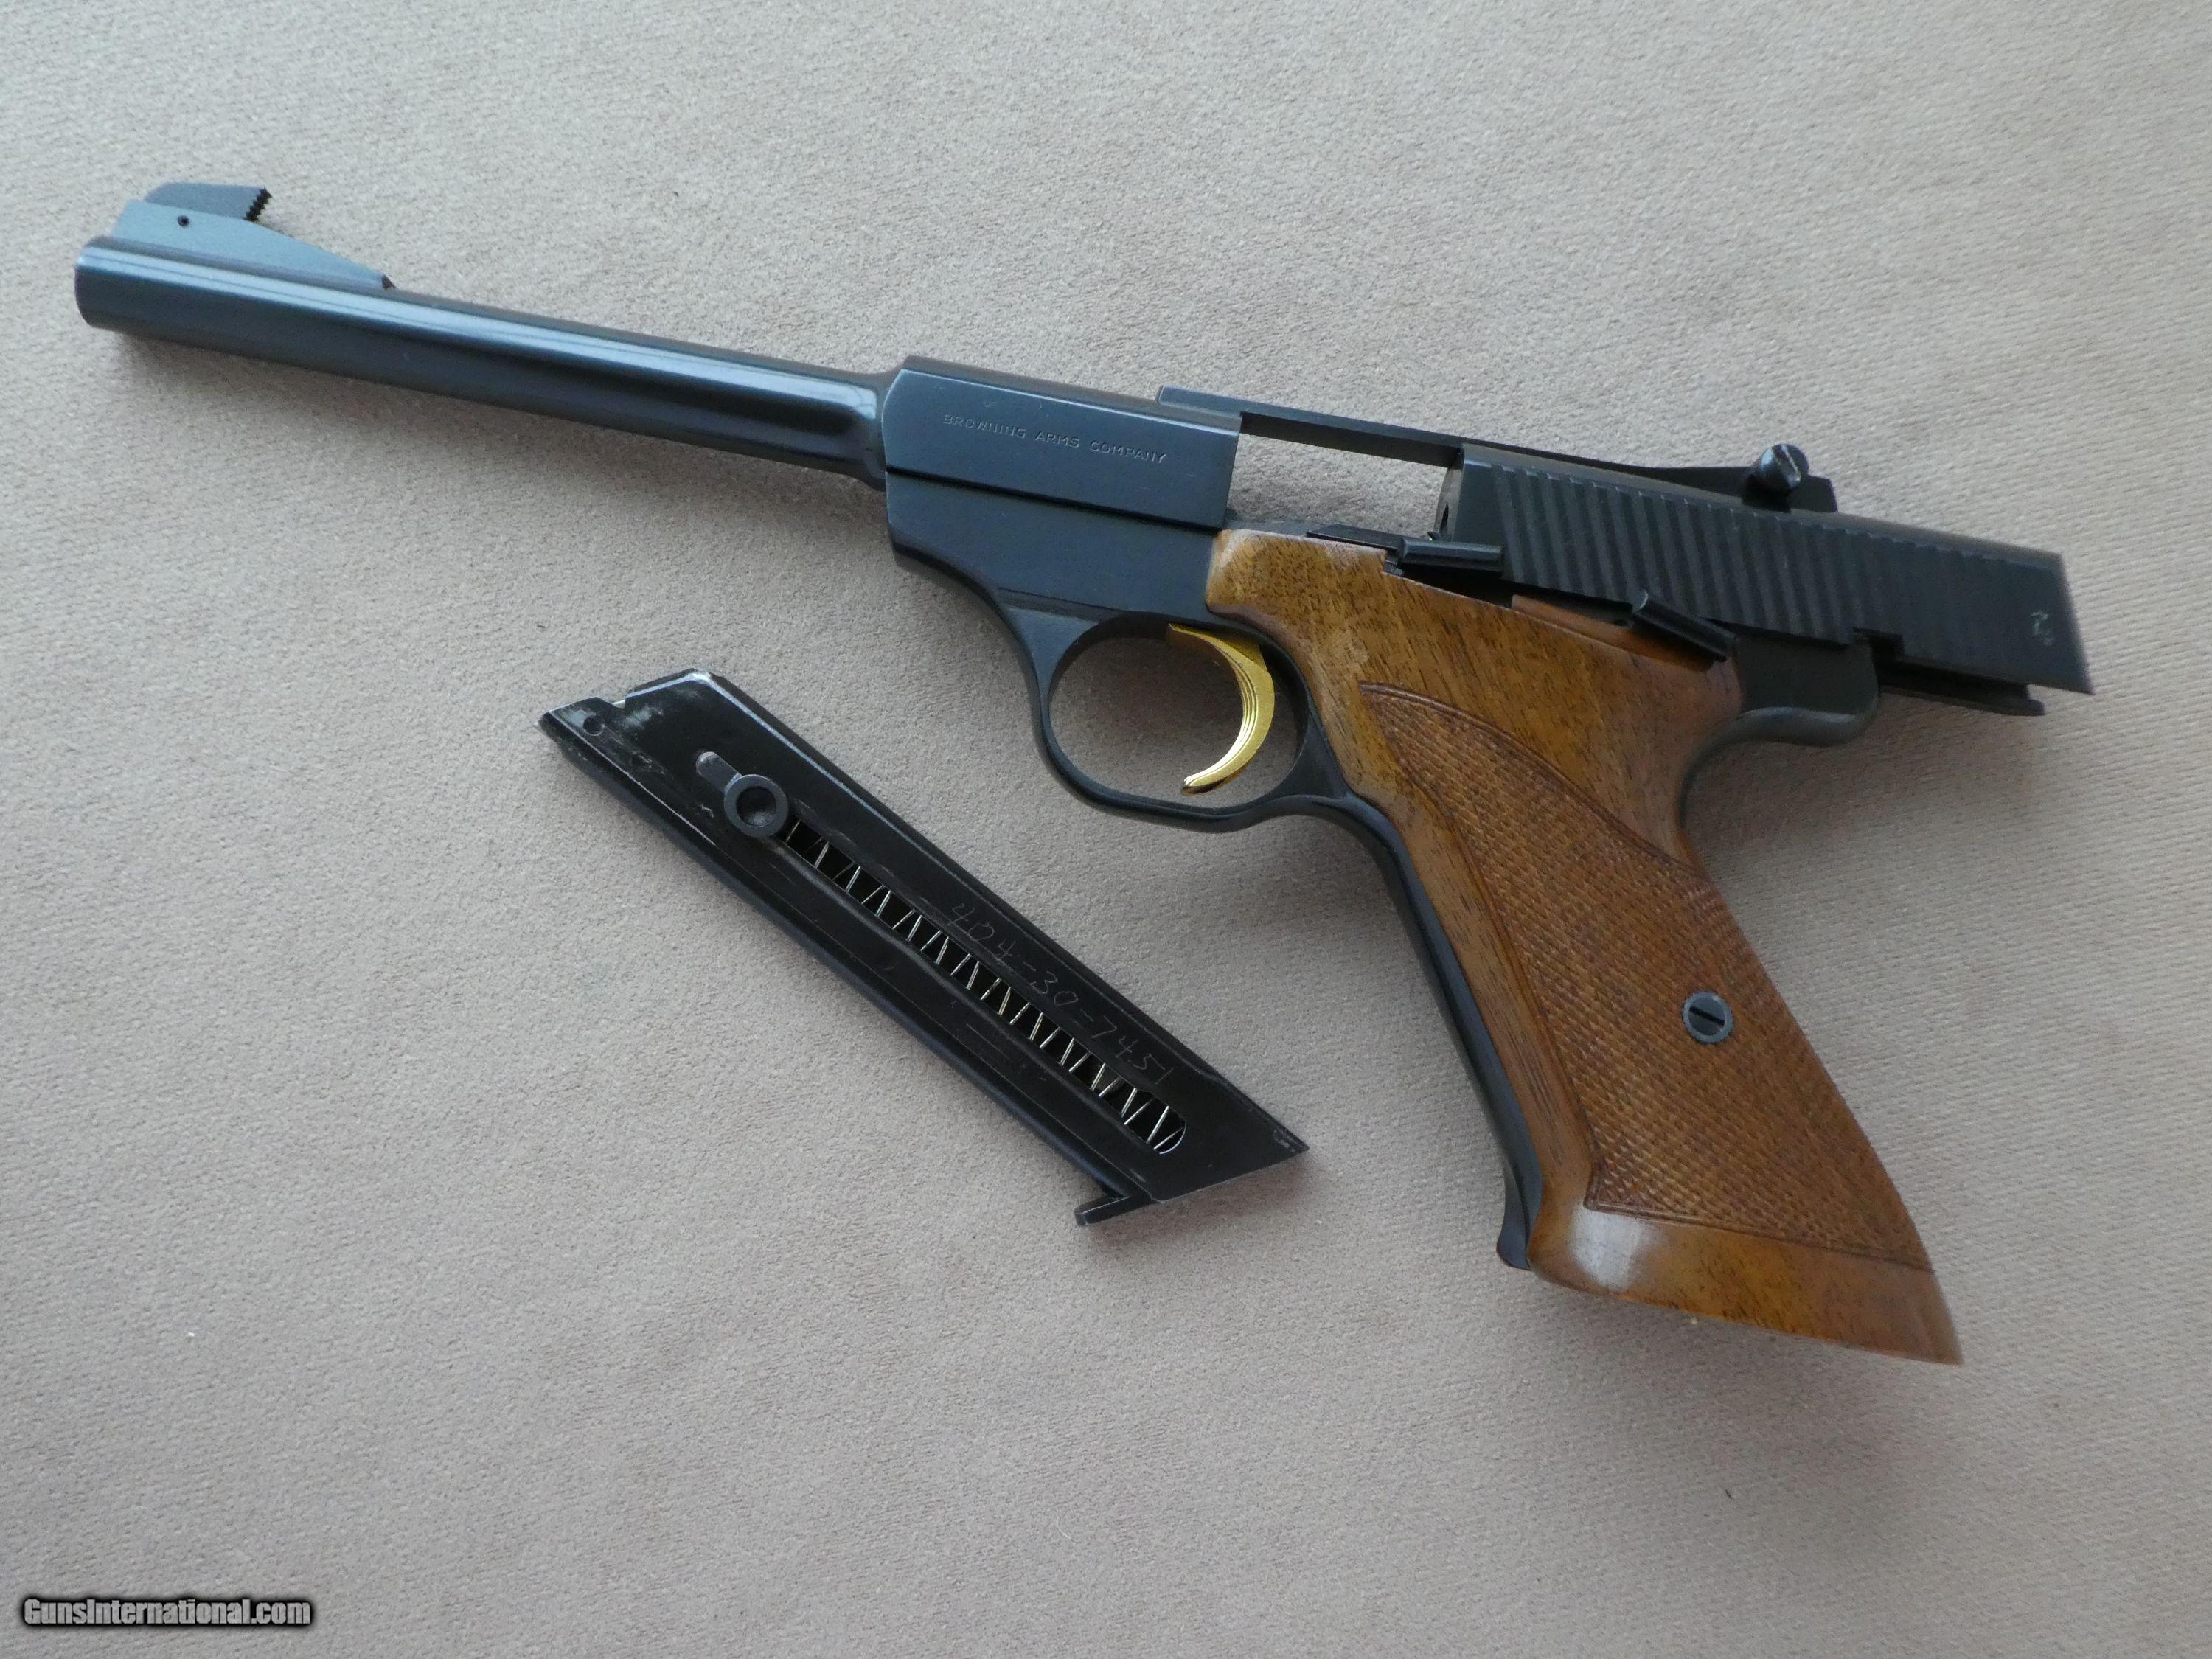 1970 Browning Challenger 22 Auto Pistol Mfg In Belgium W Manual And Factory Case Minty 5937